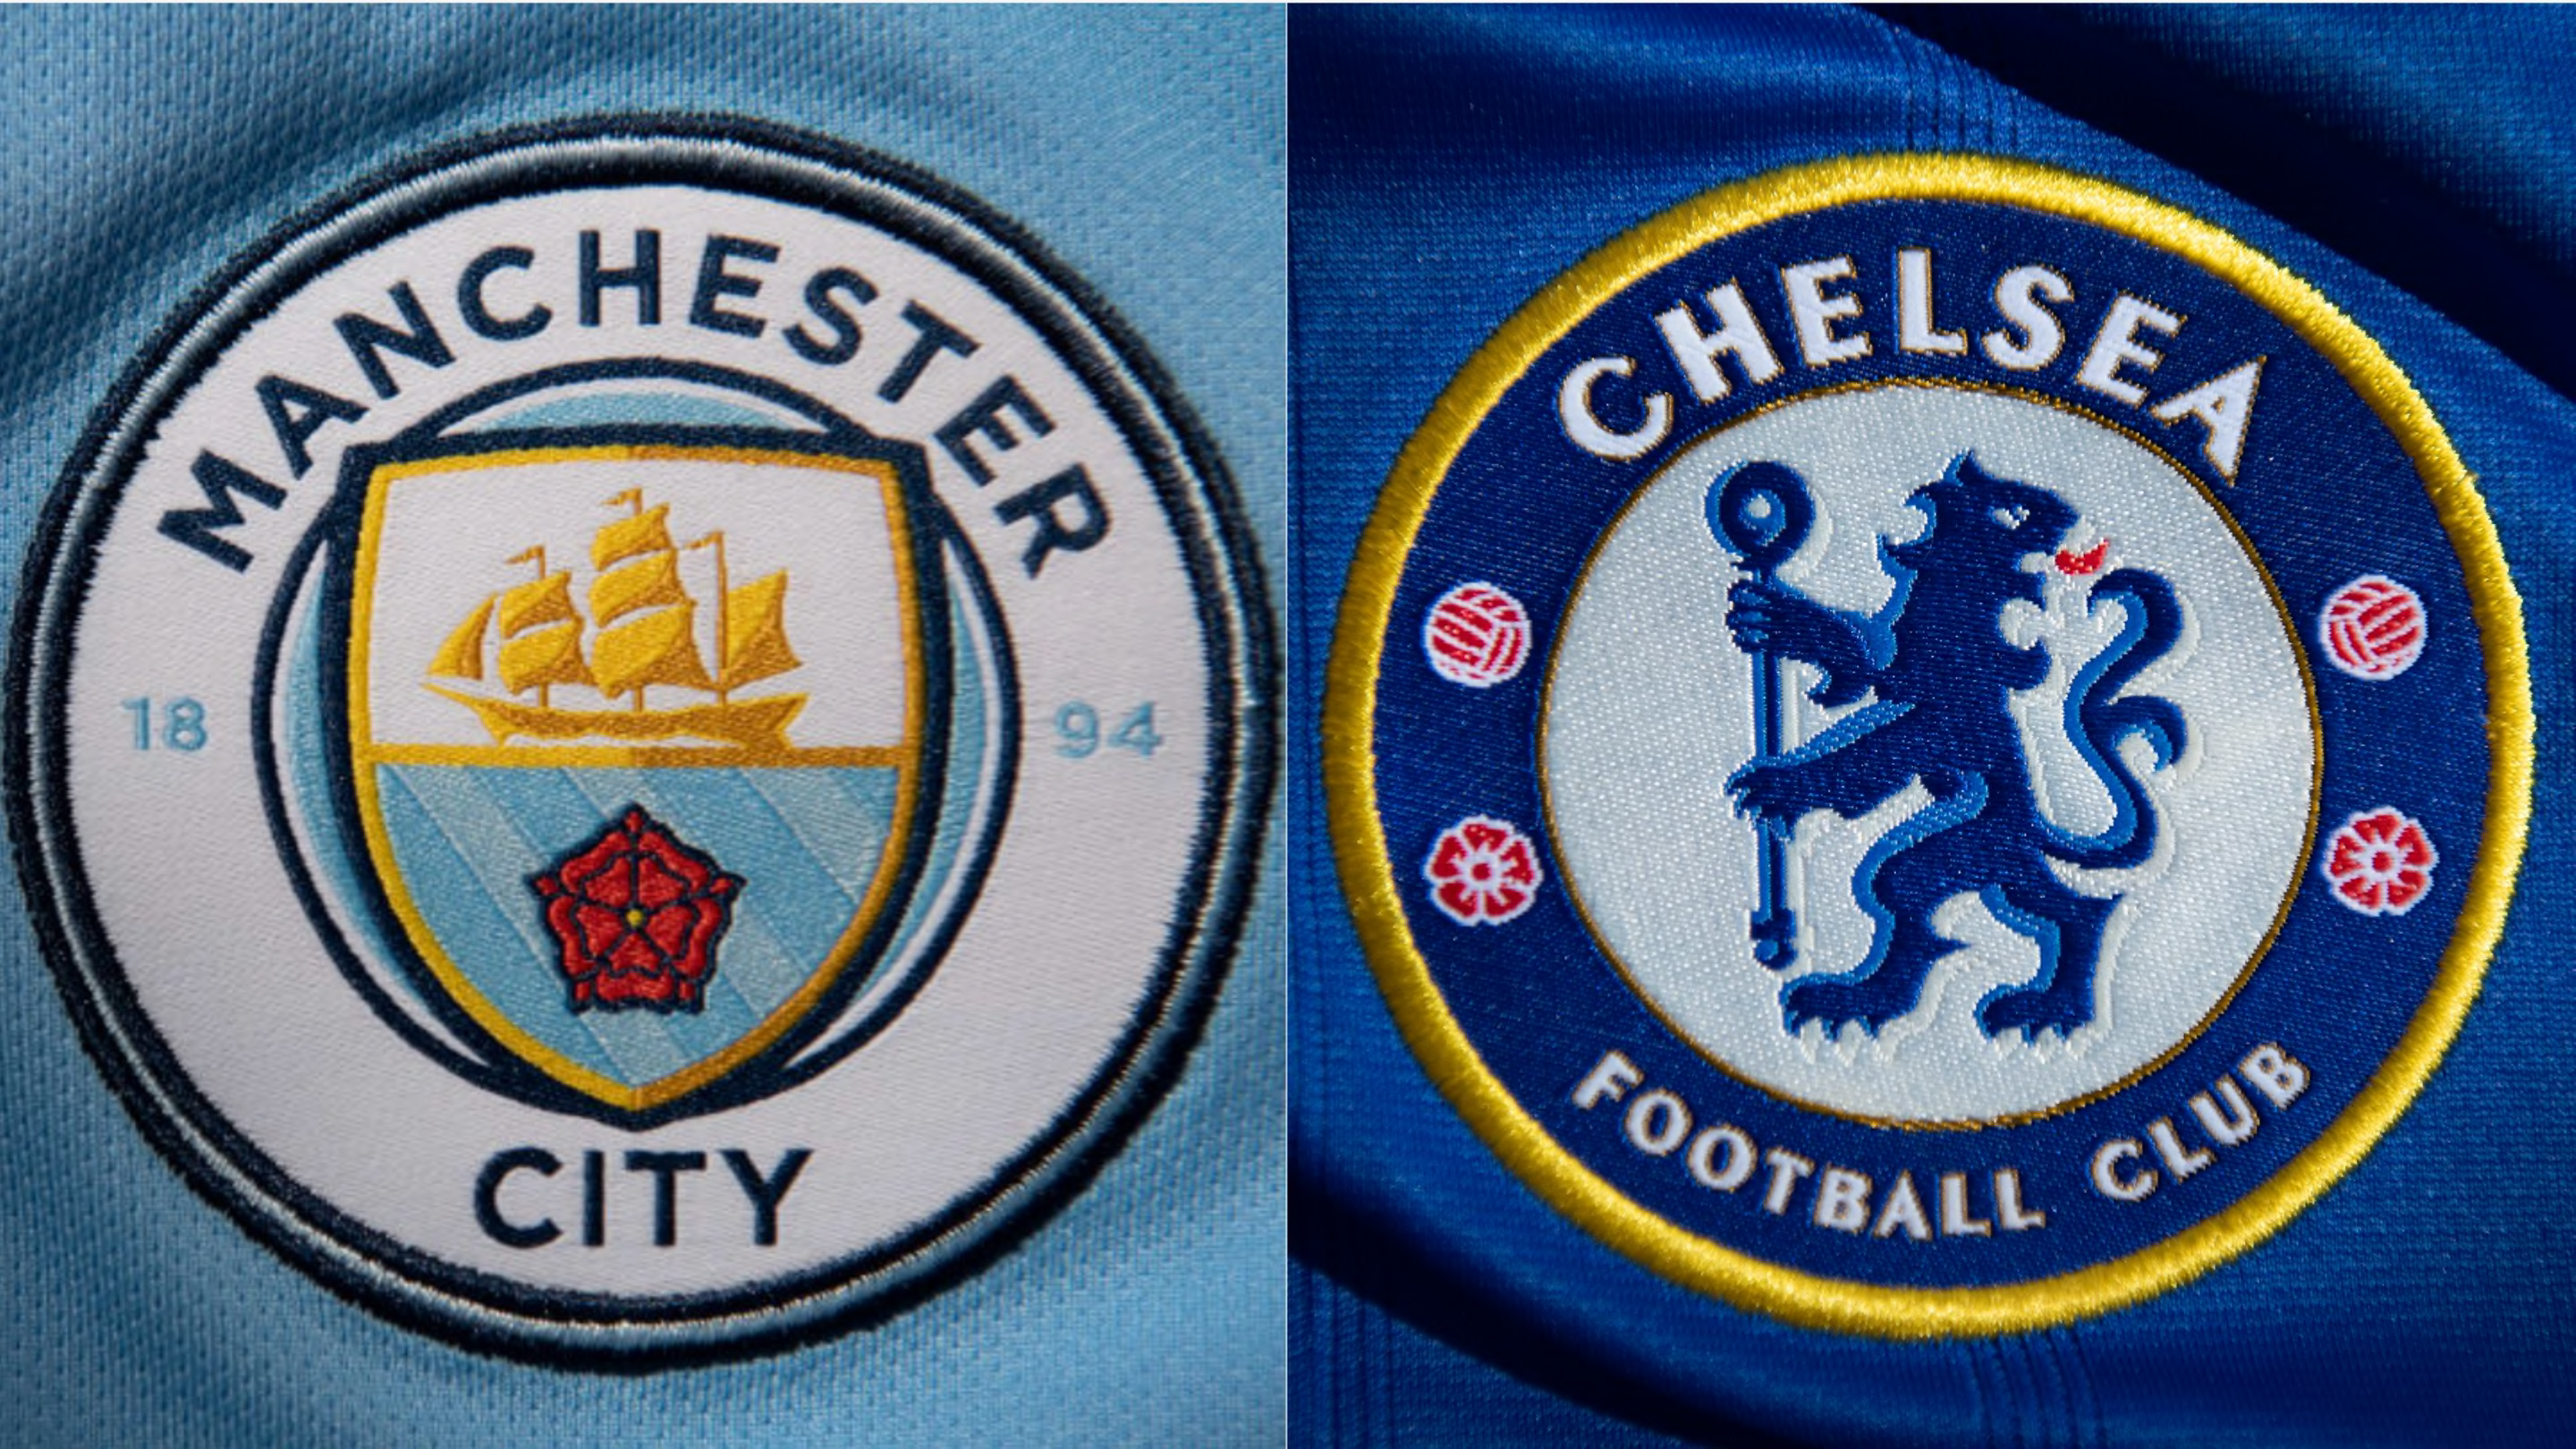 Man City vs Chelsea: The results of their last 10 meetings